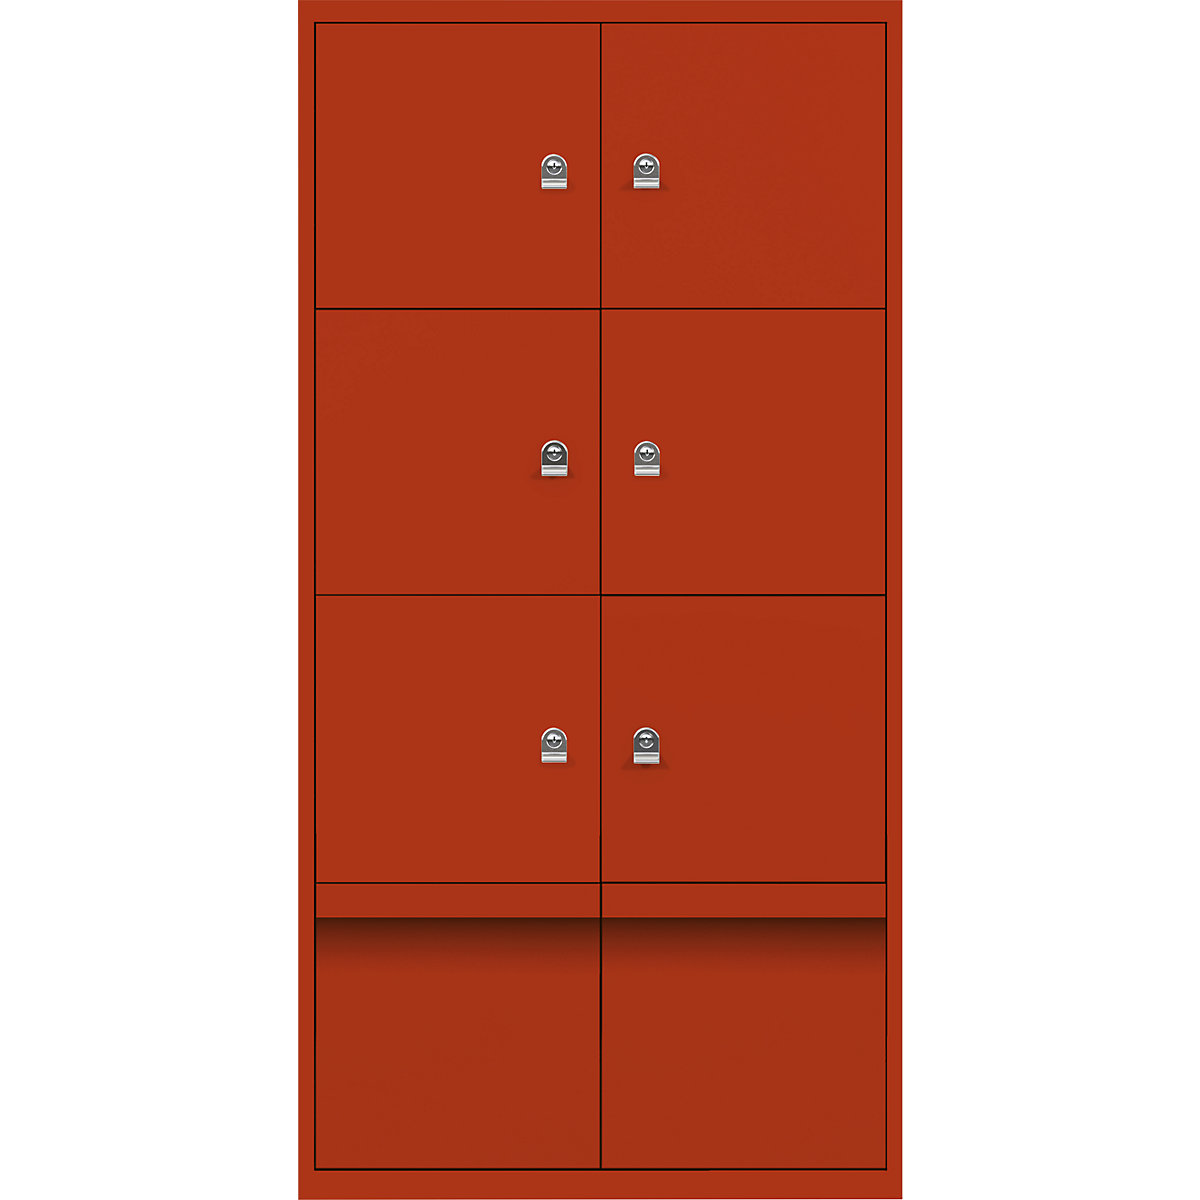 BISLEY – LateralFile™ lodge, with 6 lockable compartments and 2 drawers, height 375 mm each, sevilla